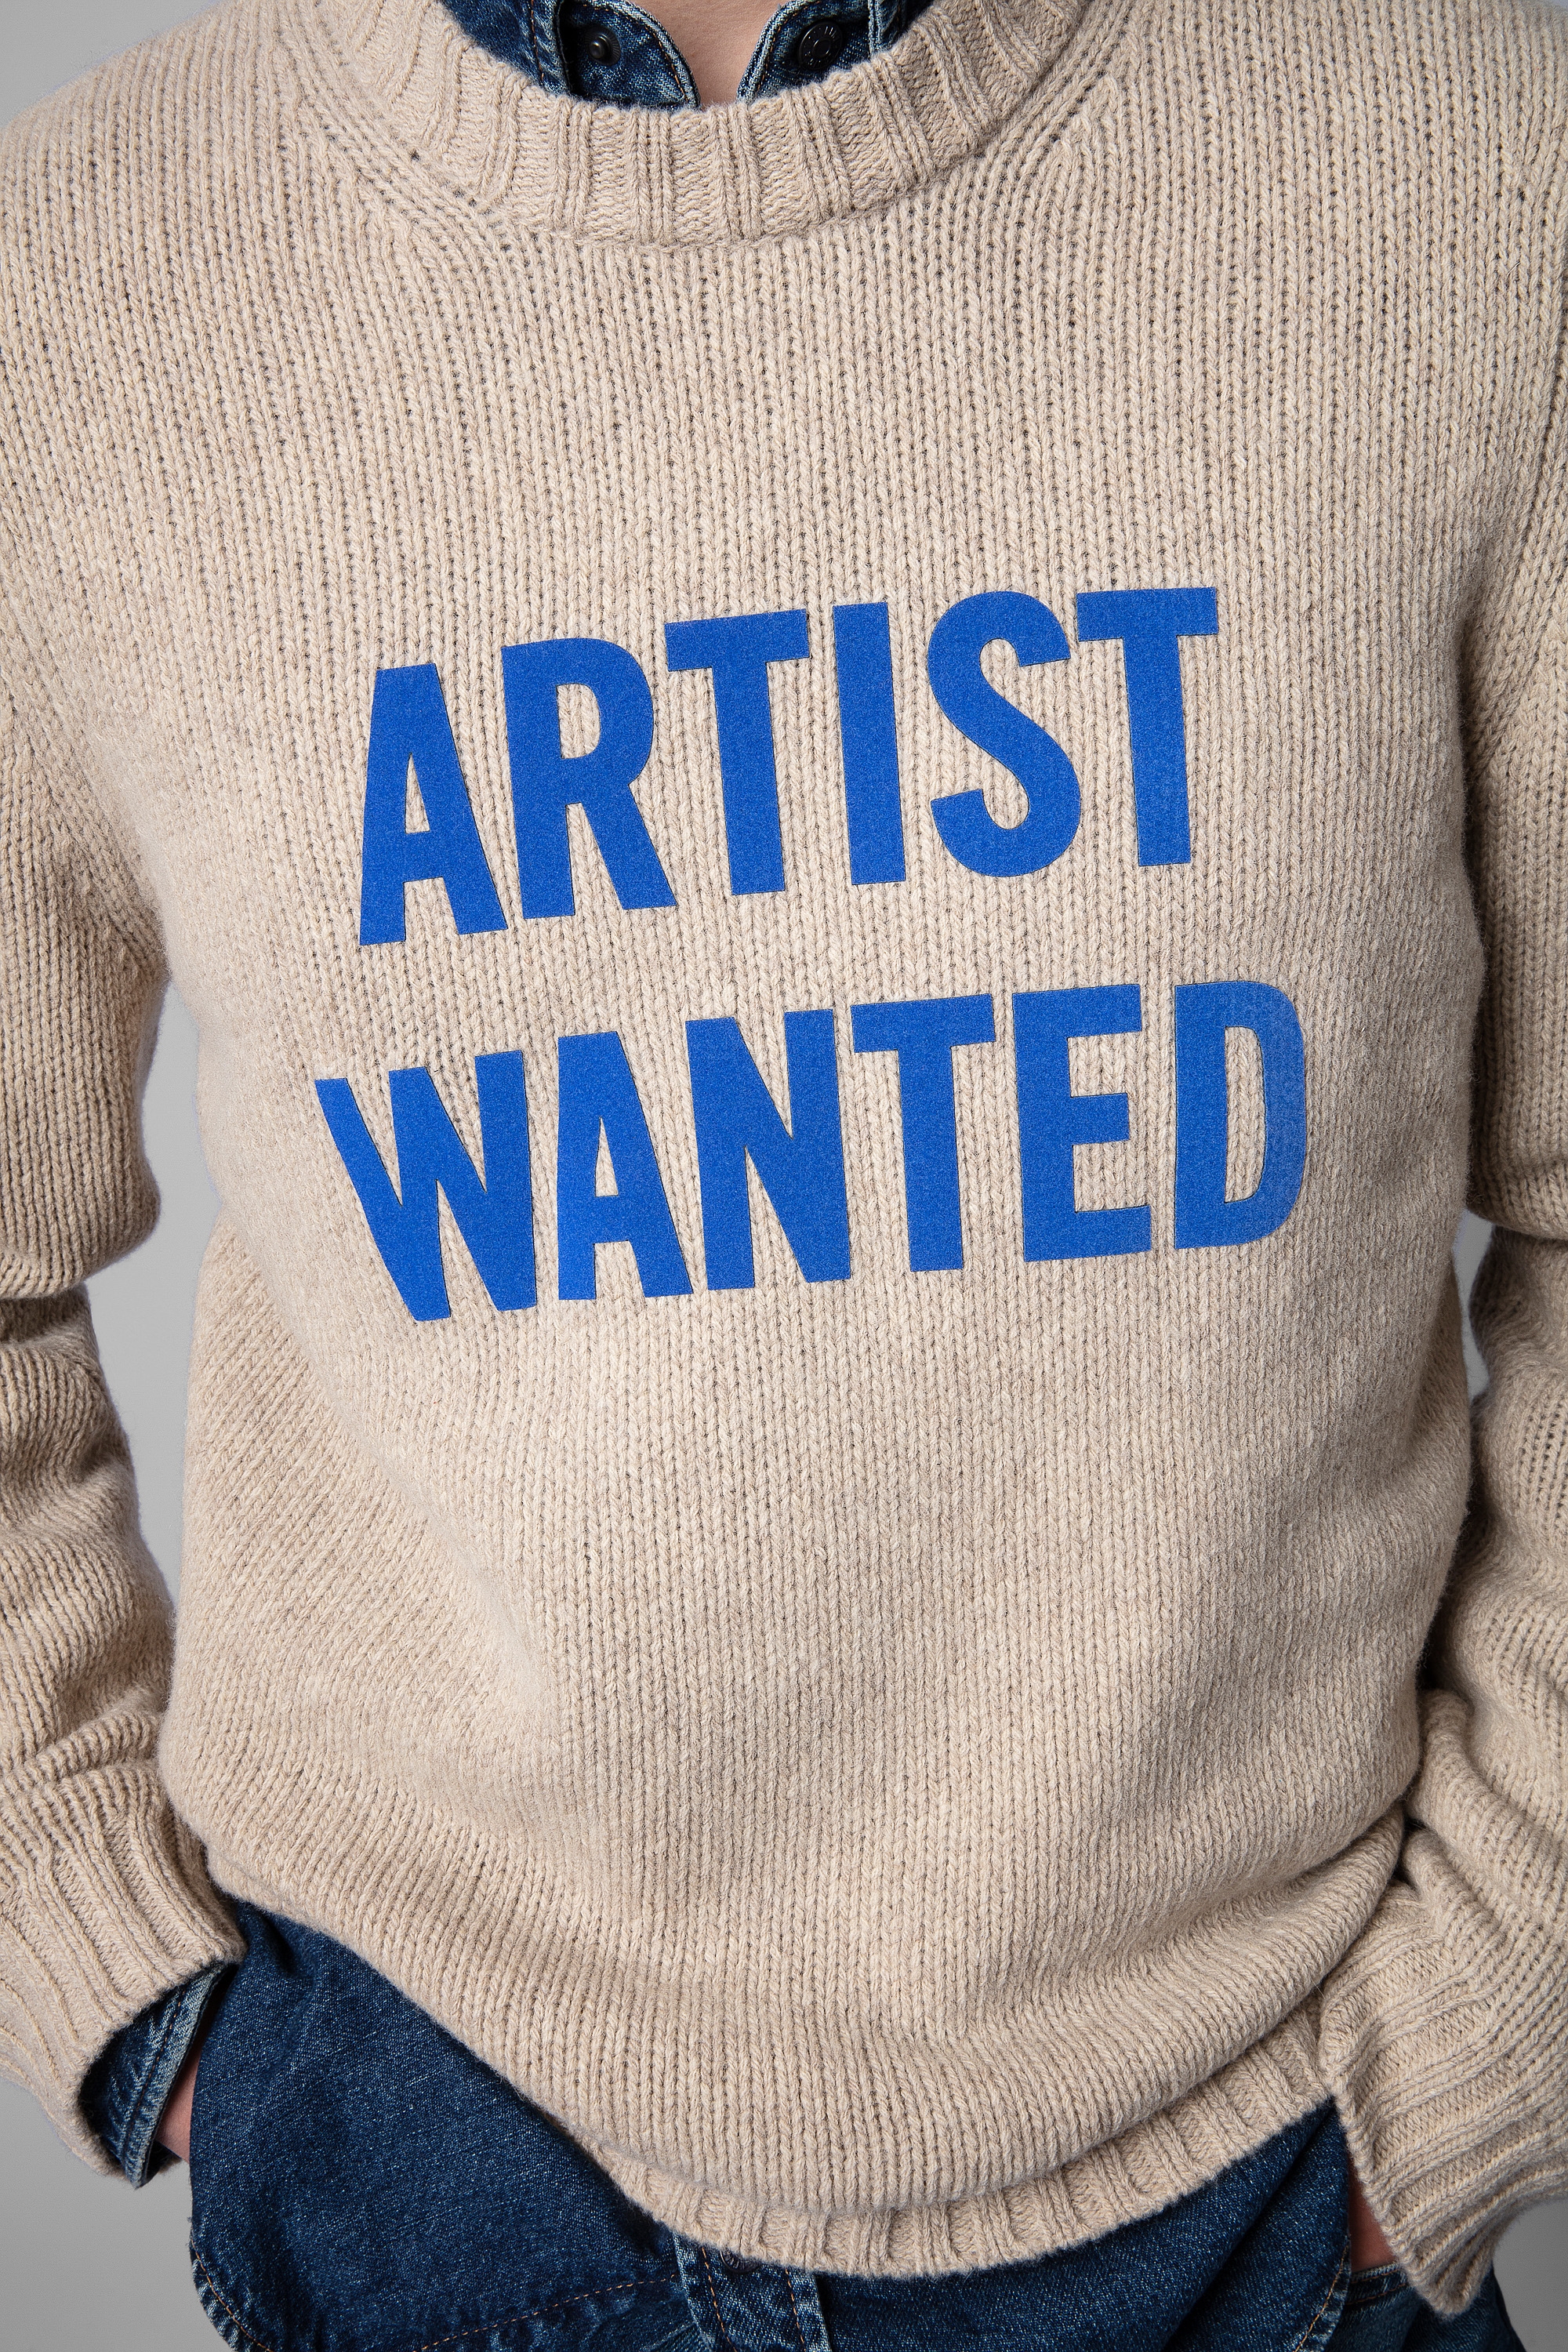 Kennedy Artist Wanted Sweater